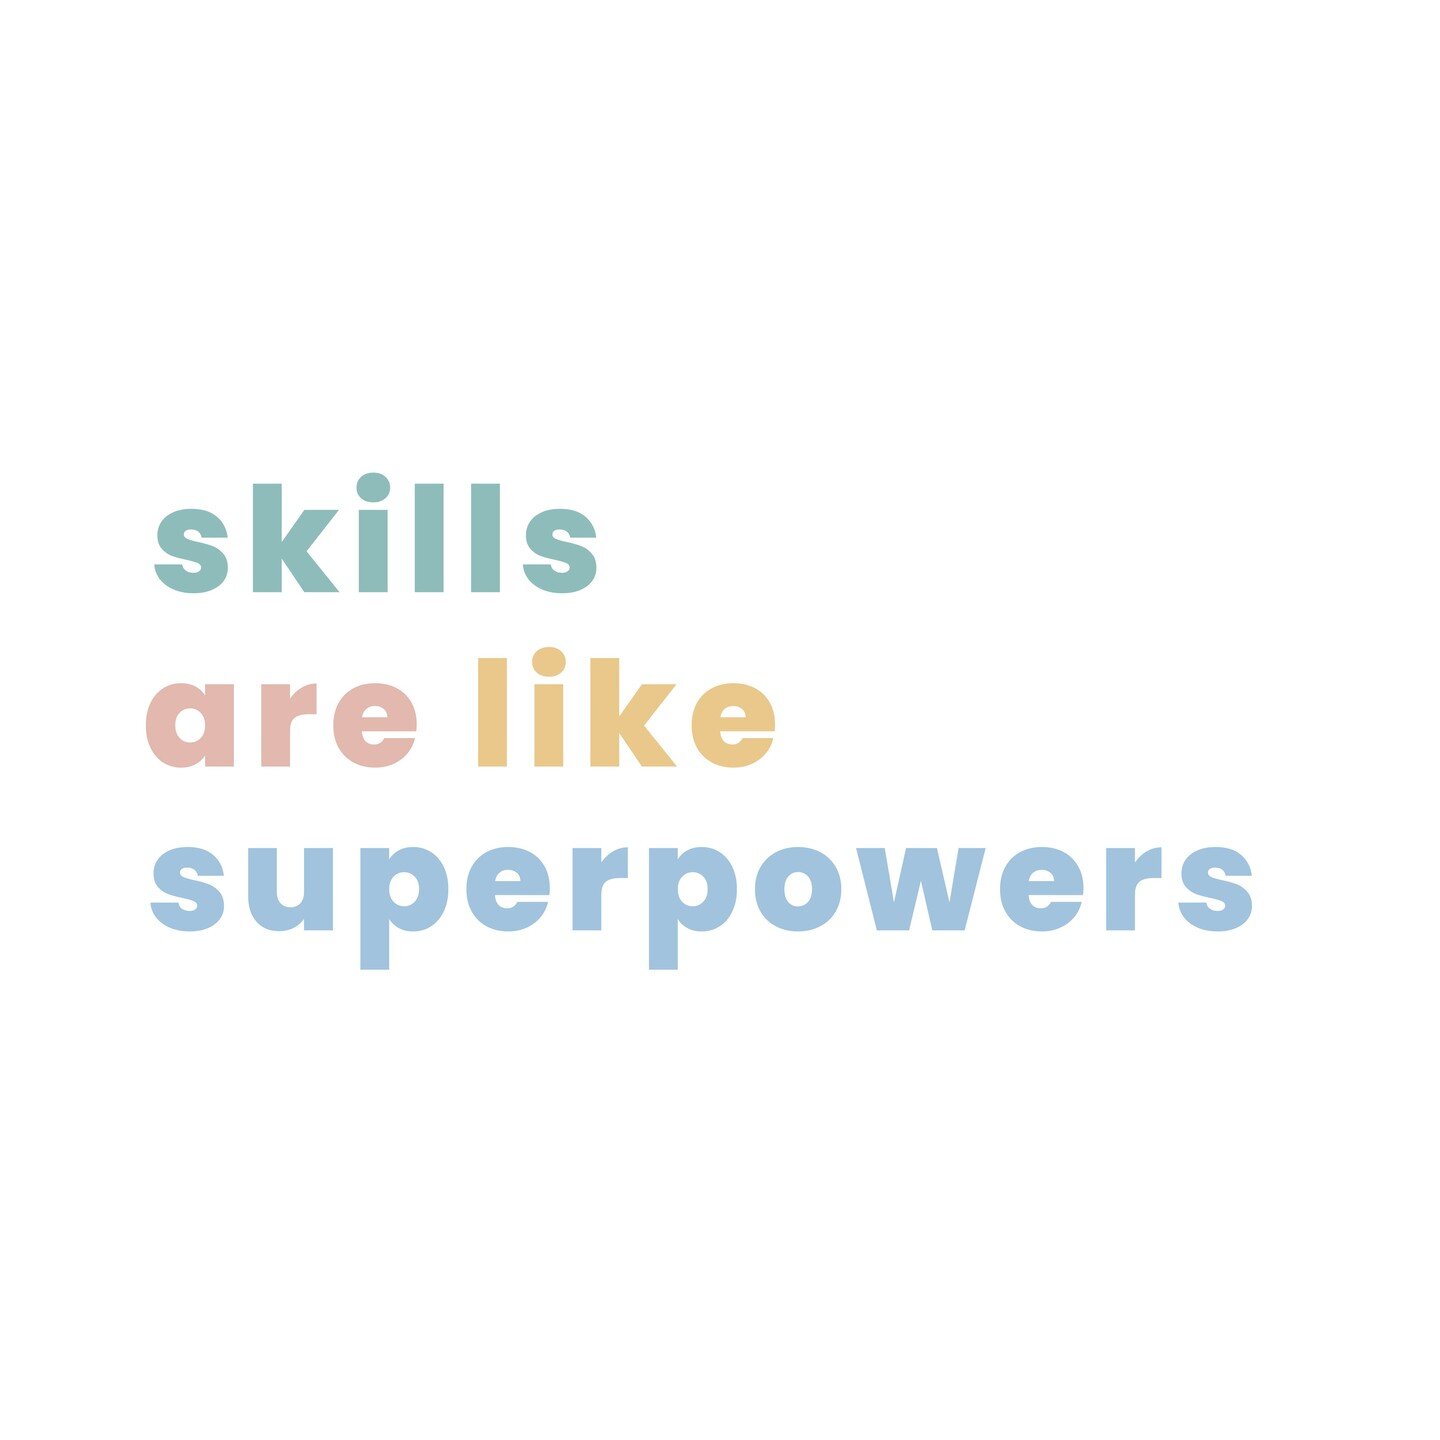 As an OT, I specialize in skills. Which is pretty much the coolest job in the world! I'm always telling my students skills are like superpowers. They make you better and stronger at everything you do. I live for those, &quot;I did it!&quot; moments w